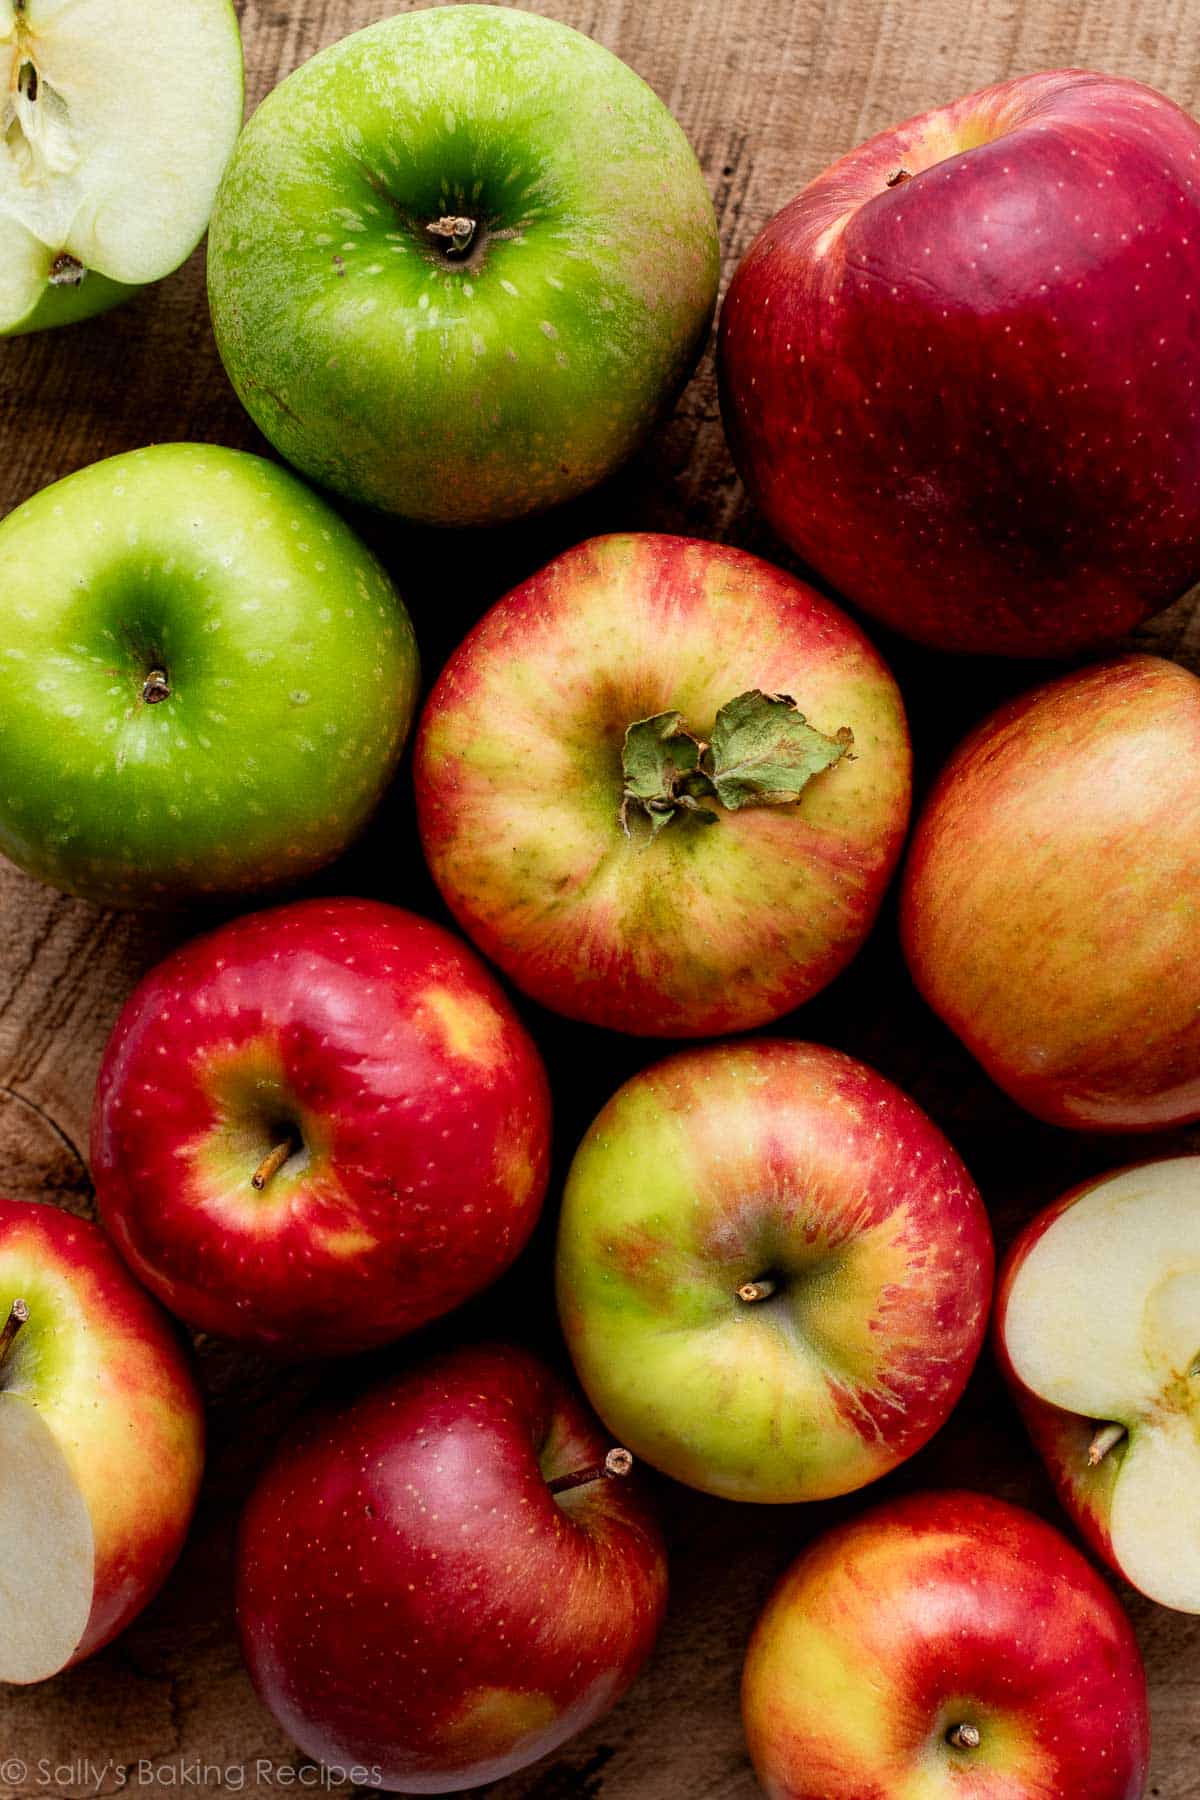 various apple varieties including Honeycrisp, Granny Smith, and Fuji on wood backdrop.